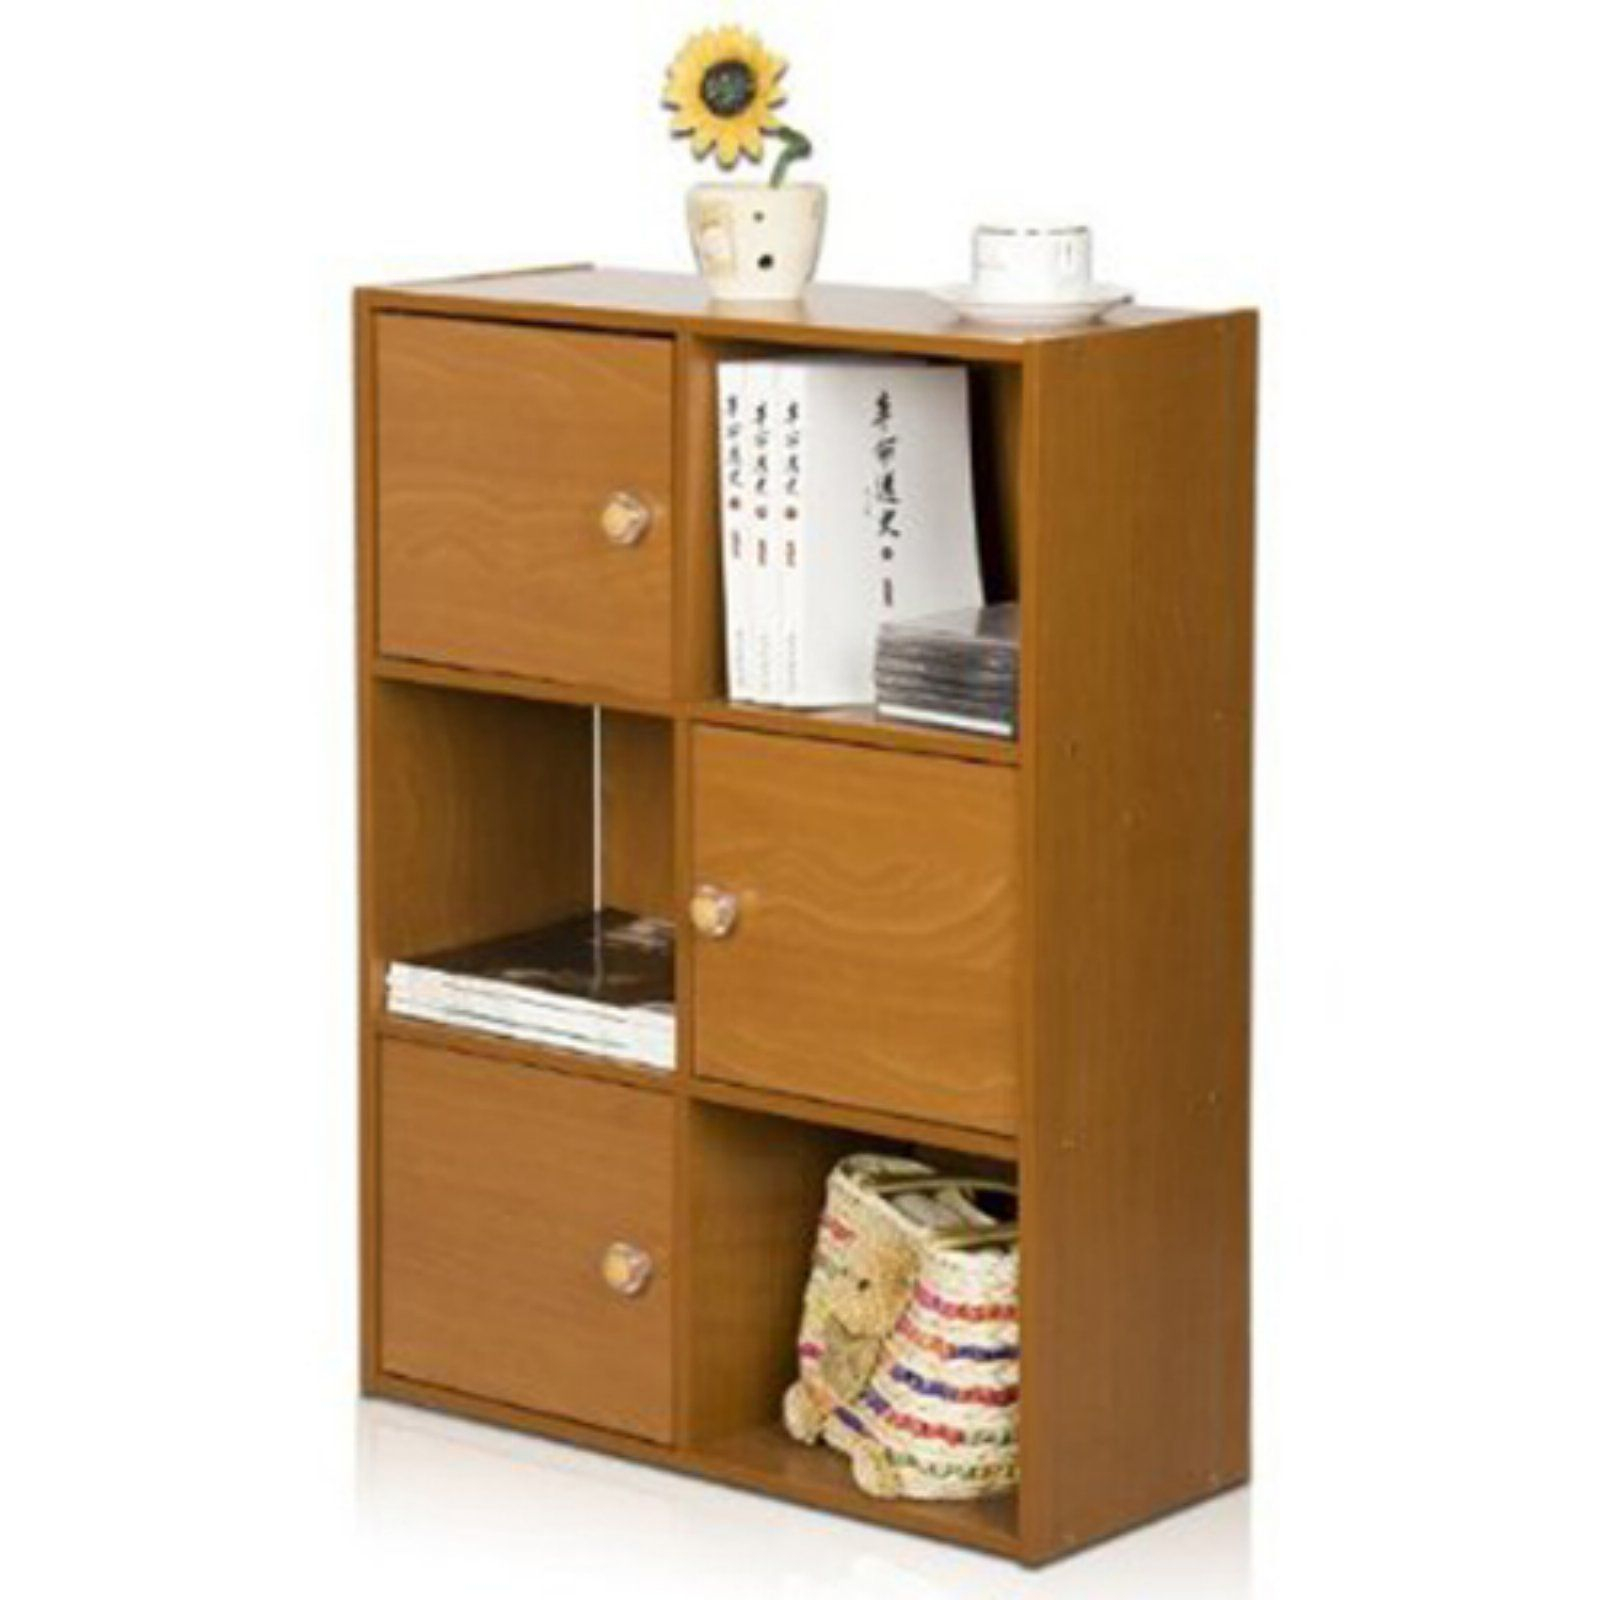 Furinno Pasir 3 Tier Storage Cube Bookcase Cabinet intended for size 1600 X 1600